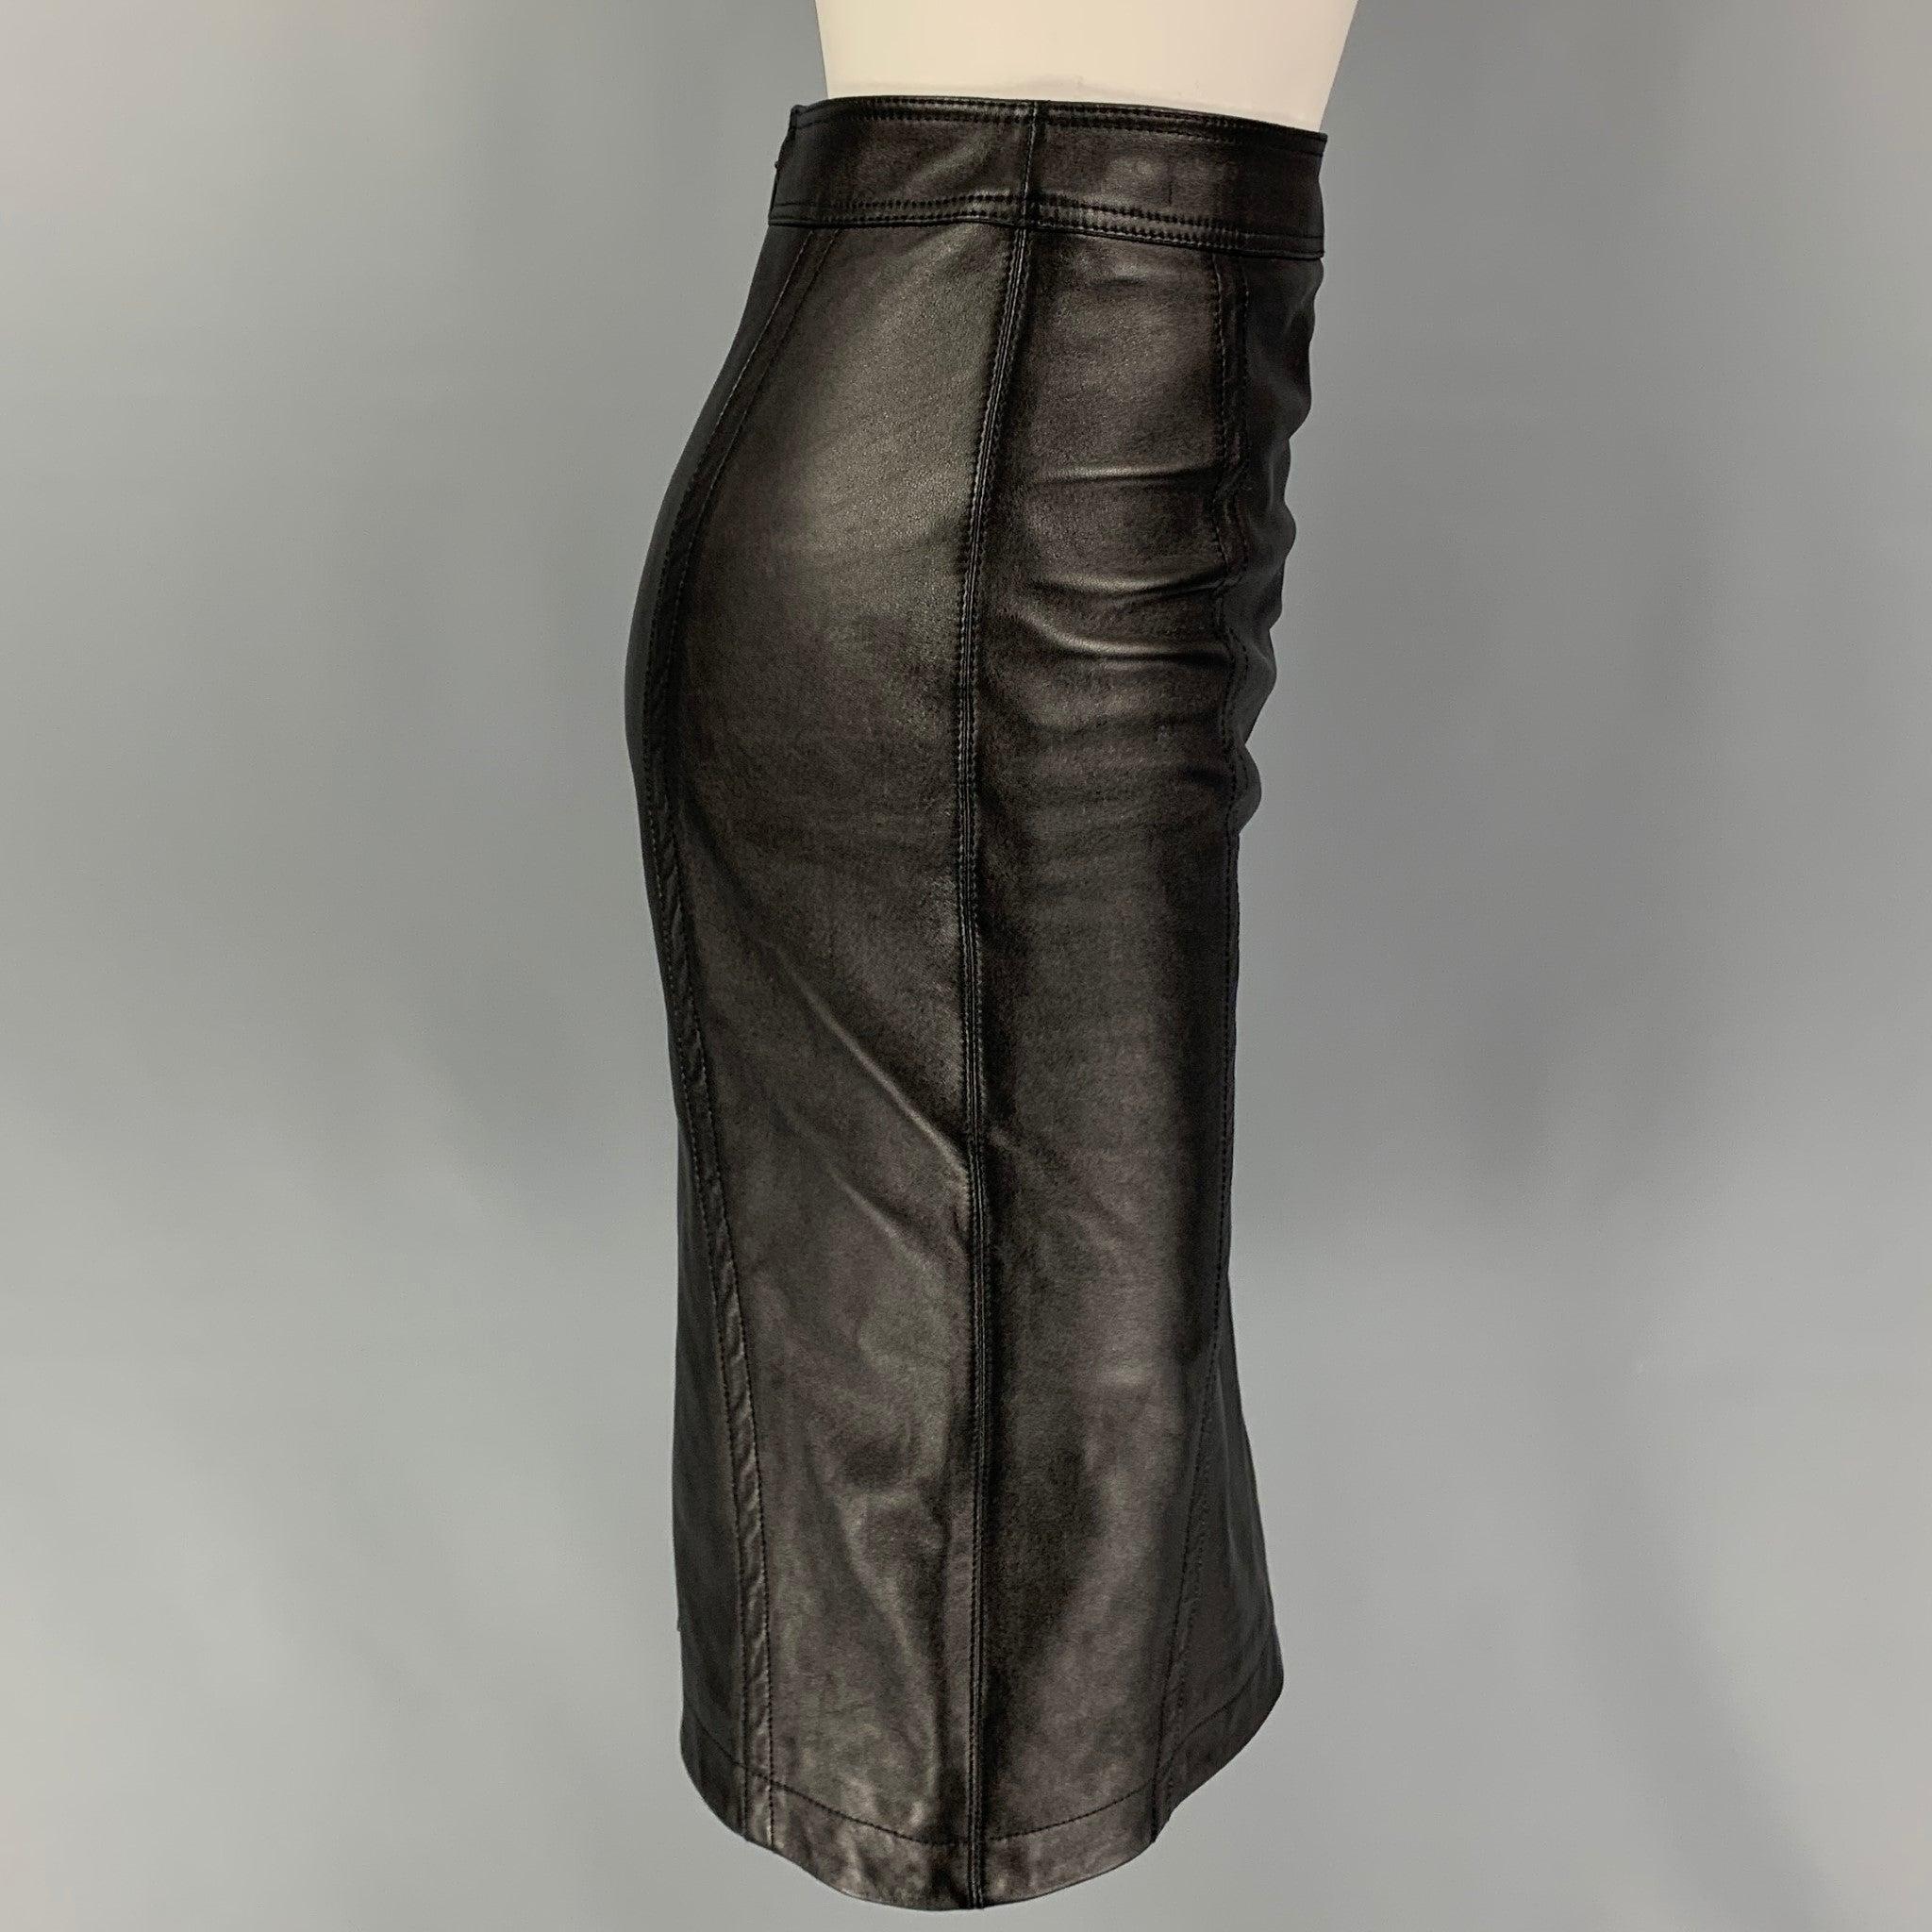 SAINT LAURENT skirt comes in a black lamb skin leather featuring a pencil style, back slit, and a back zip up closure. Made in Italy.
Very Good
Pre-Owned Condition. 

Marked:   F 34 

Measurements: 
  Waist: 24 inches  Hip: 34 inches  Length: 25